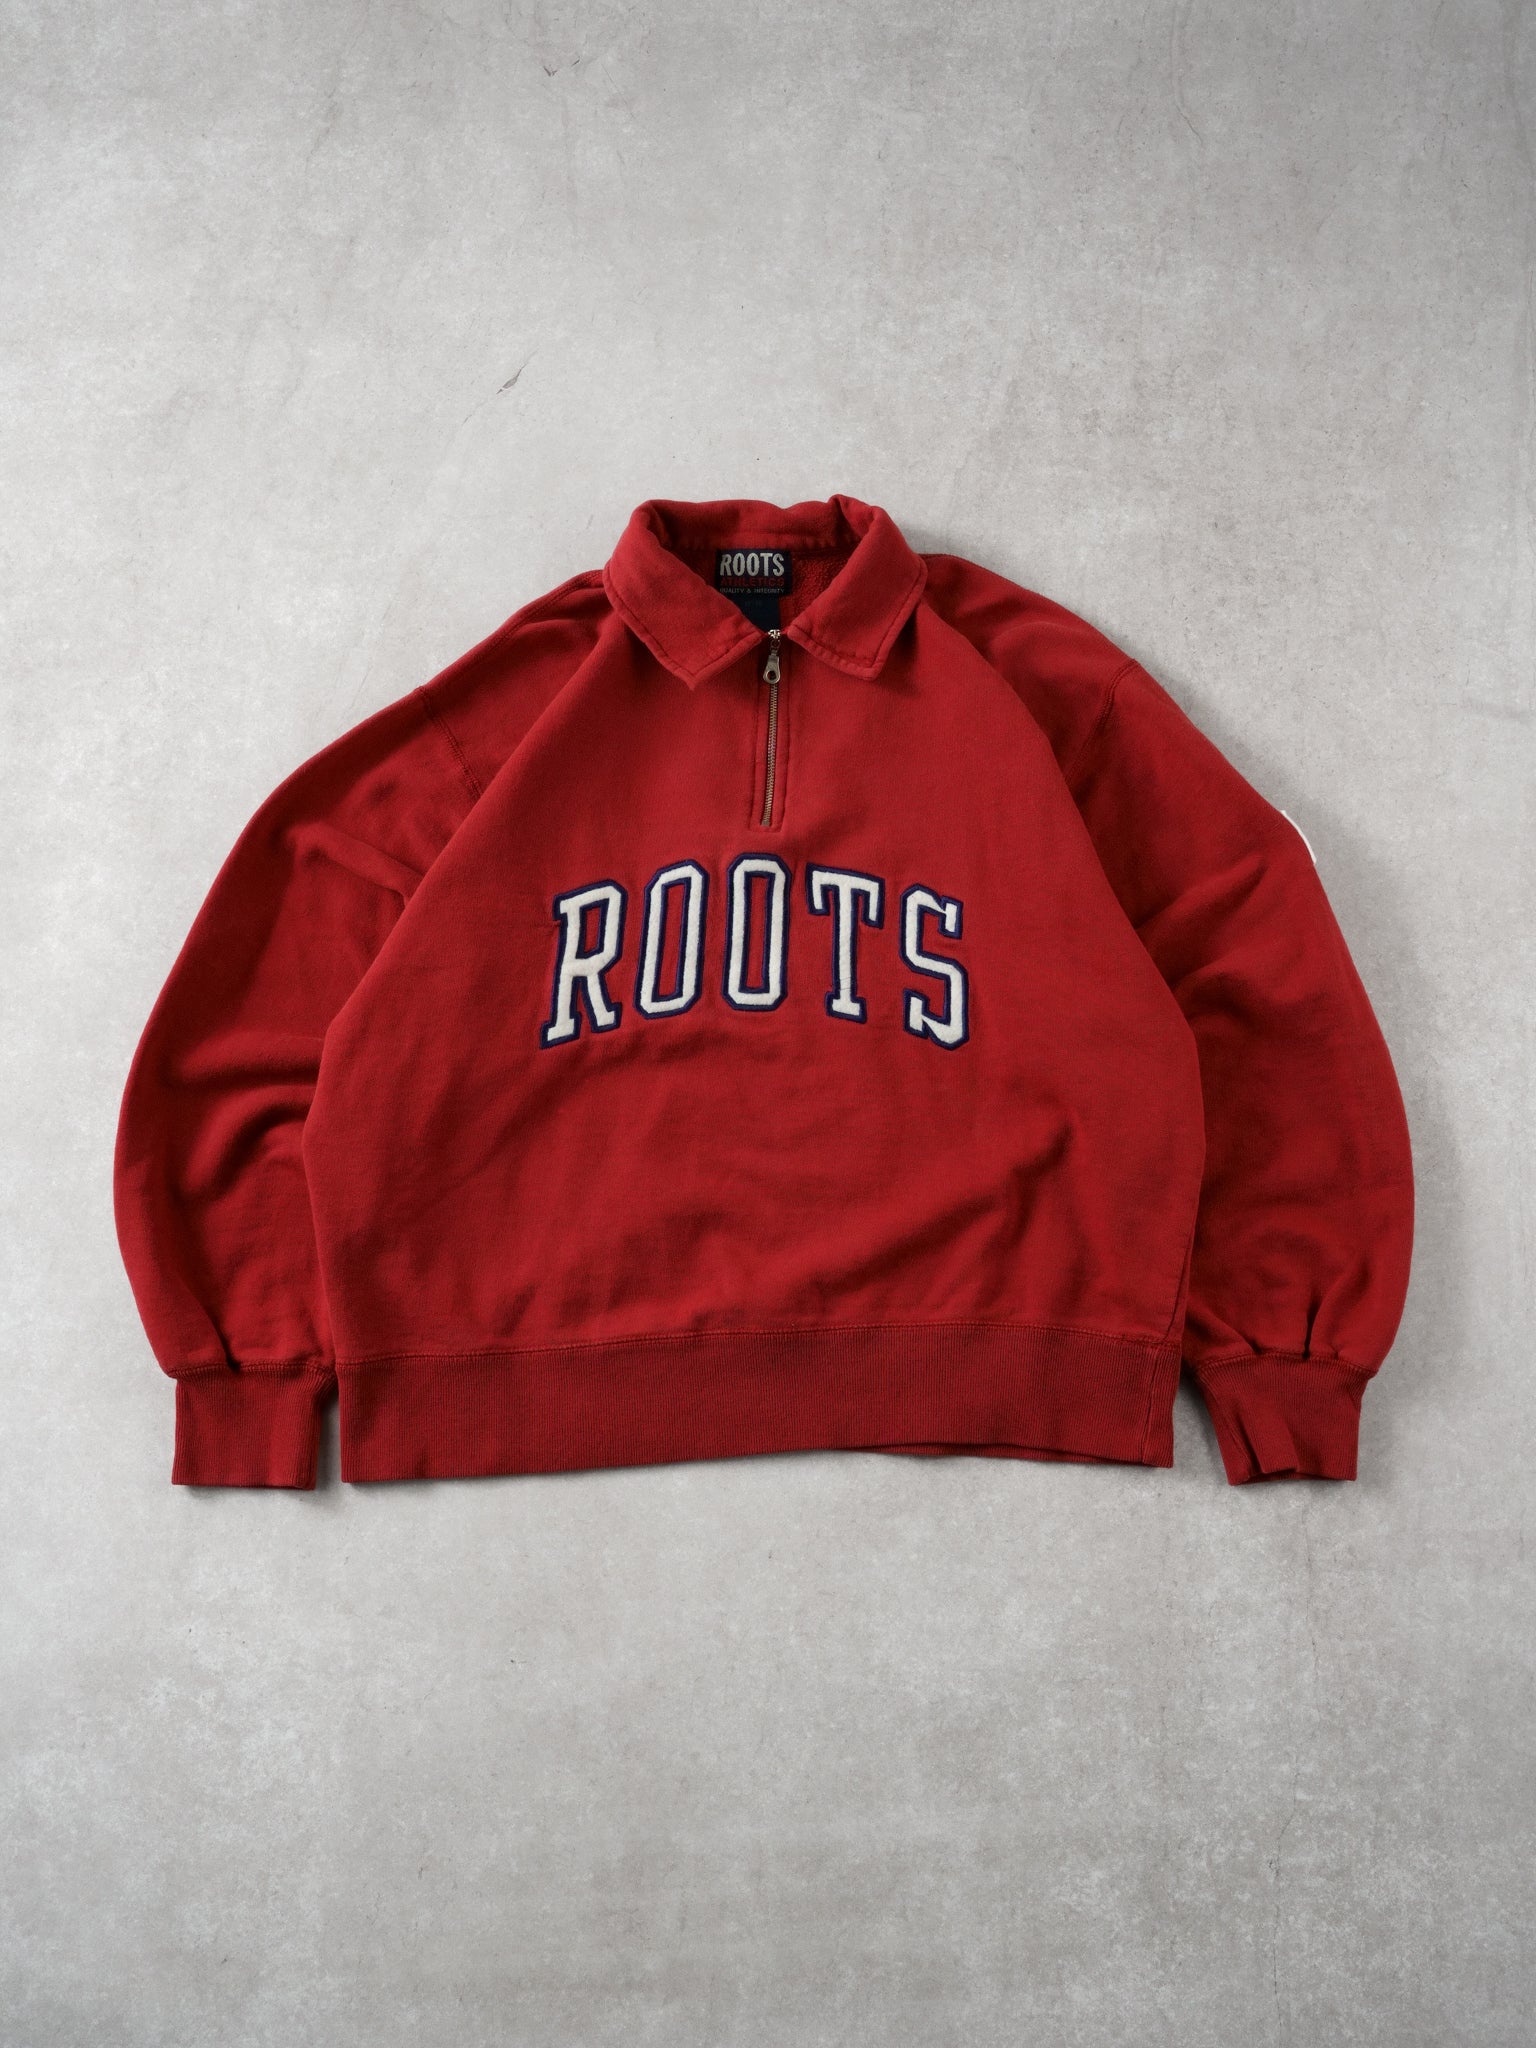 Vintage 90s Washed Red Roots Collared 1/4 Zipup (L)